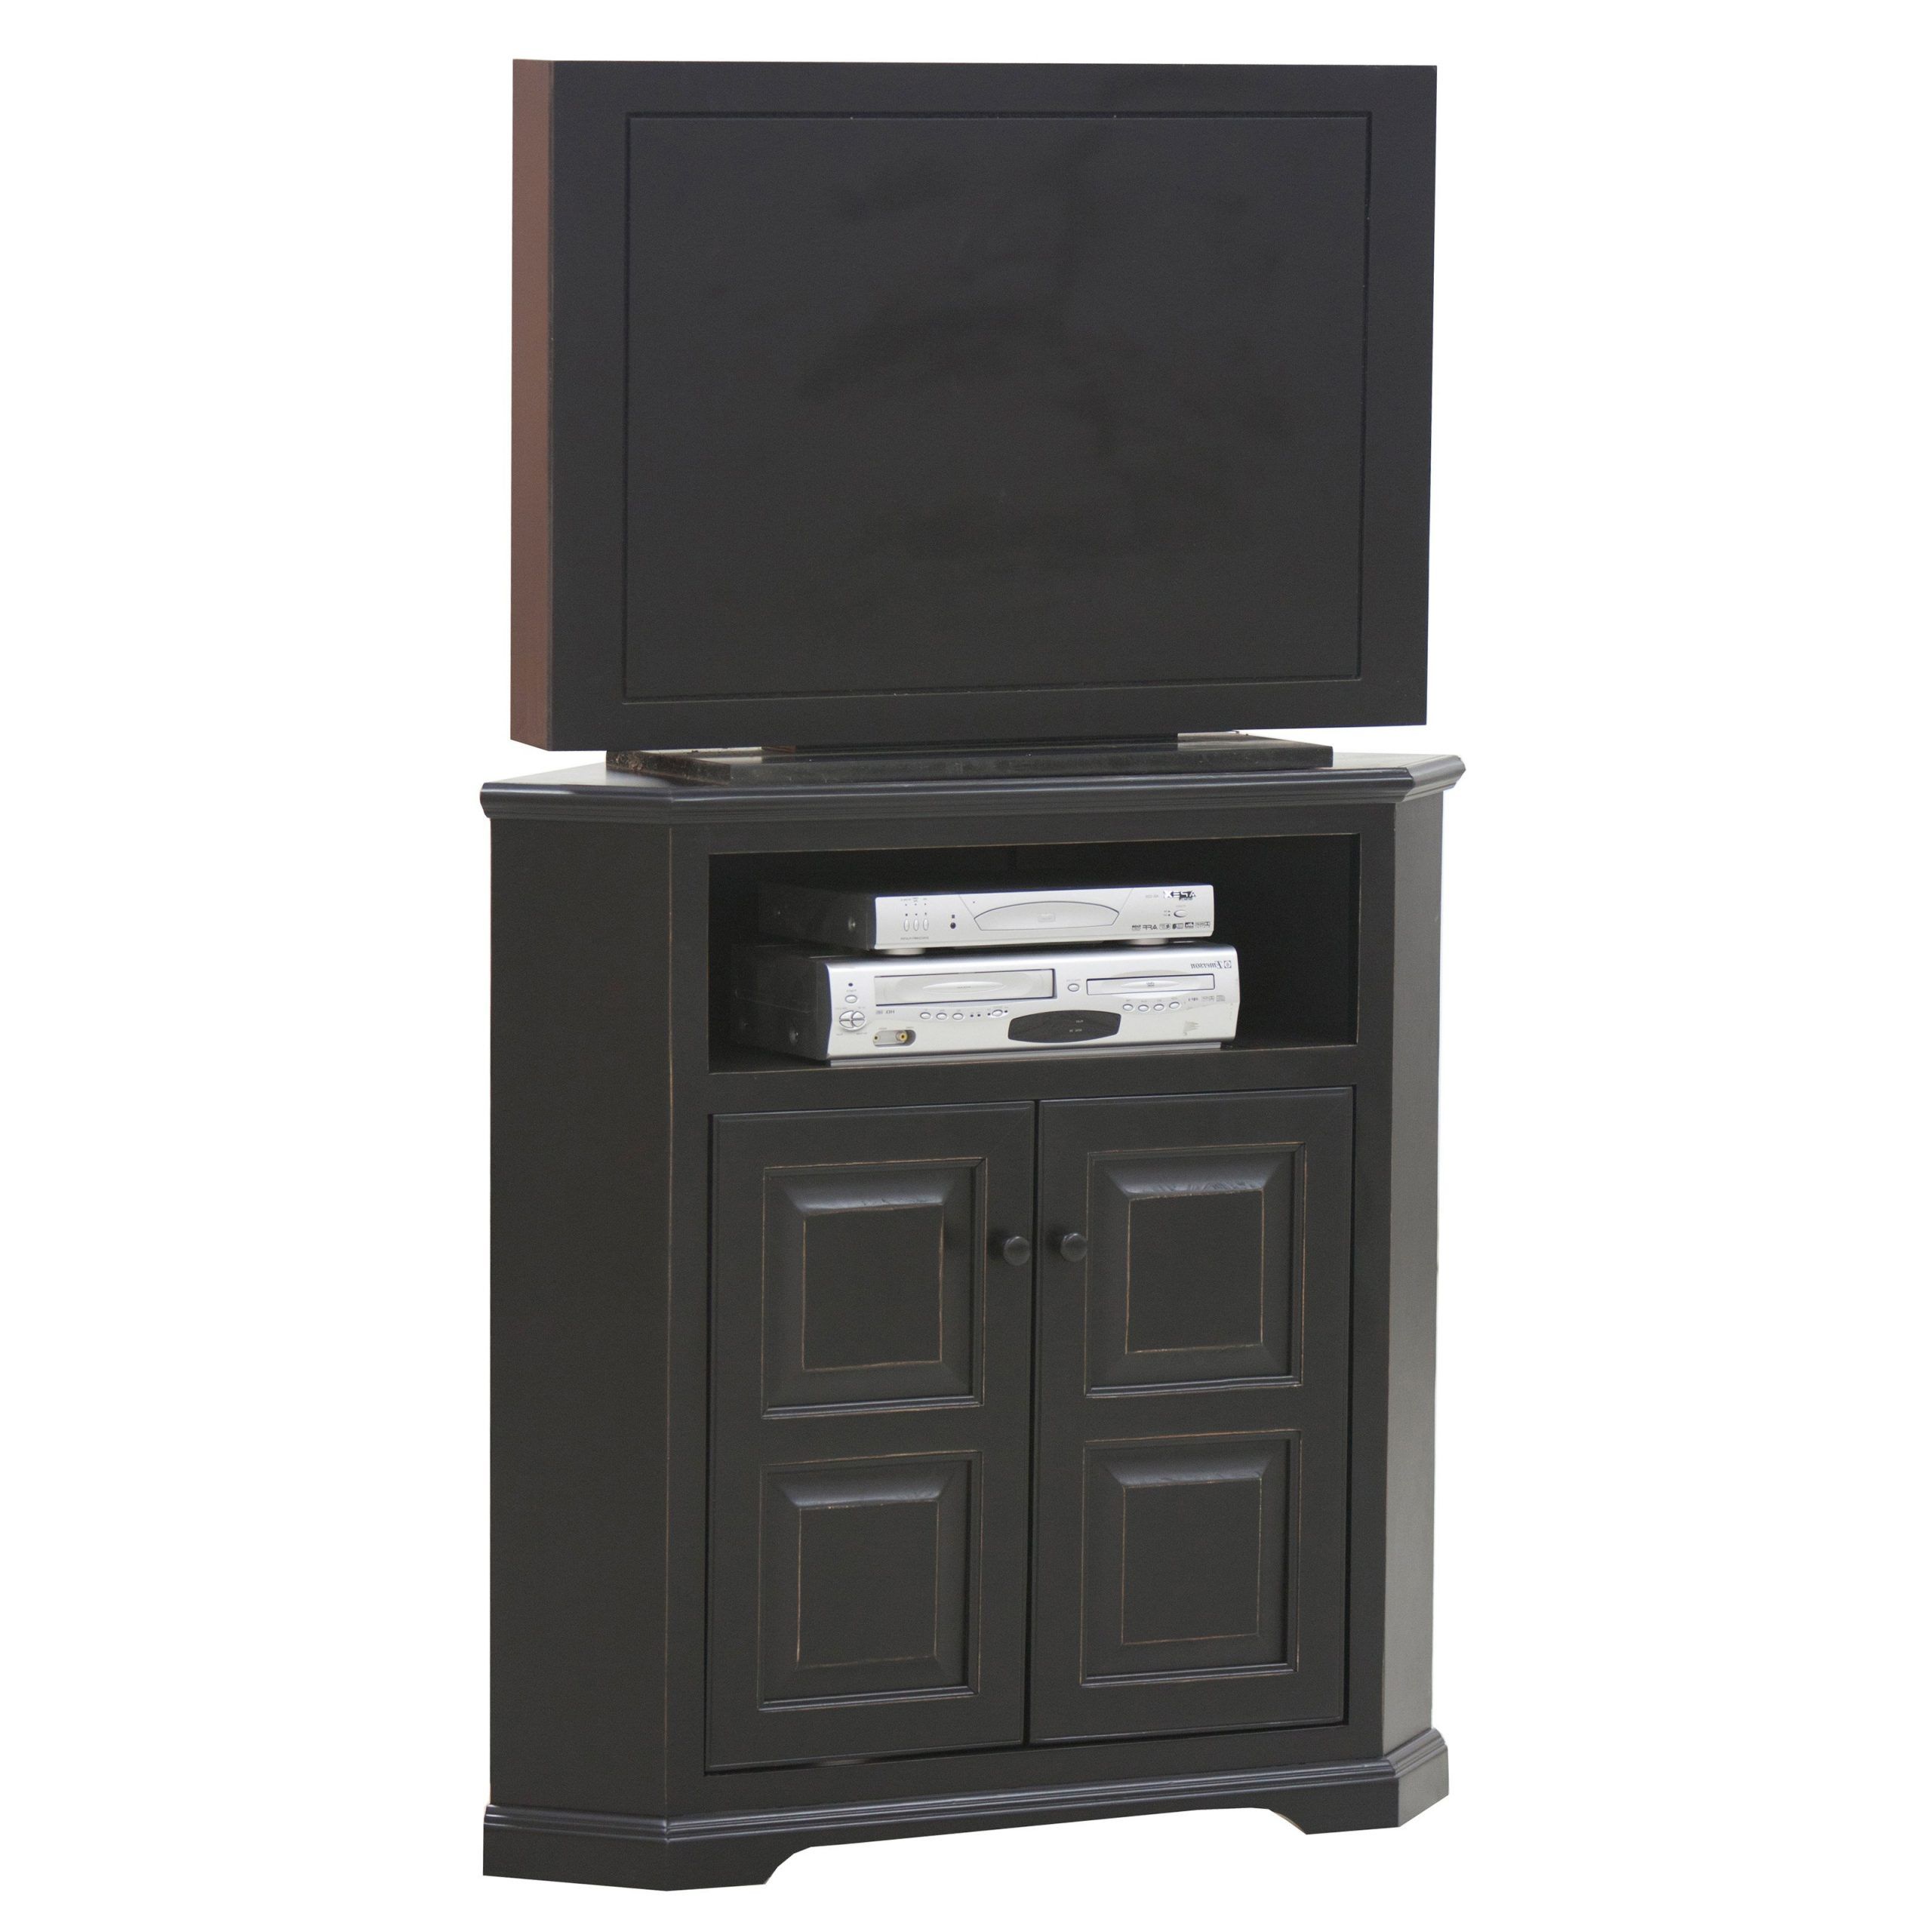 Eagle Furniture Savannah 41 In. Wide Corner Tv Stand In Carbon Wide Tv Stands (Gallery 17 of 20)